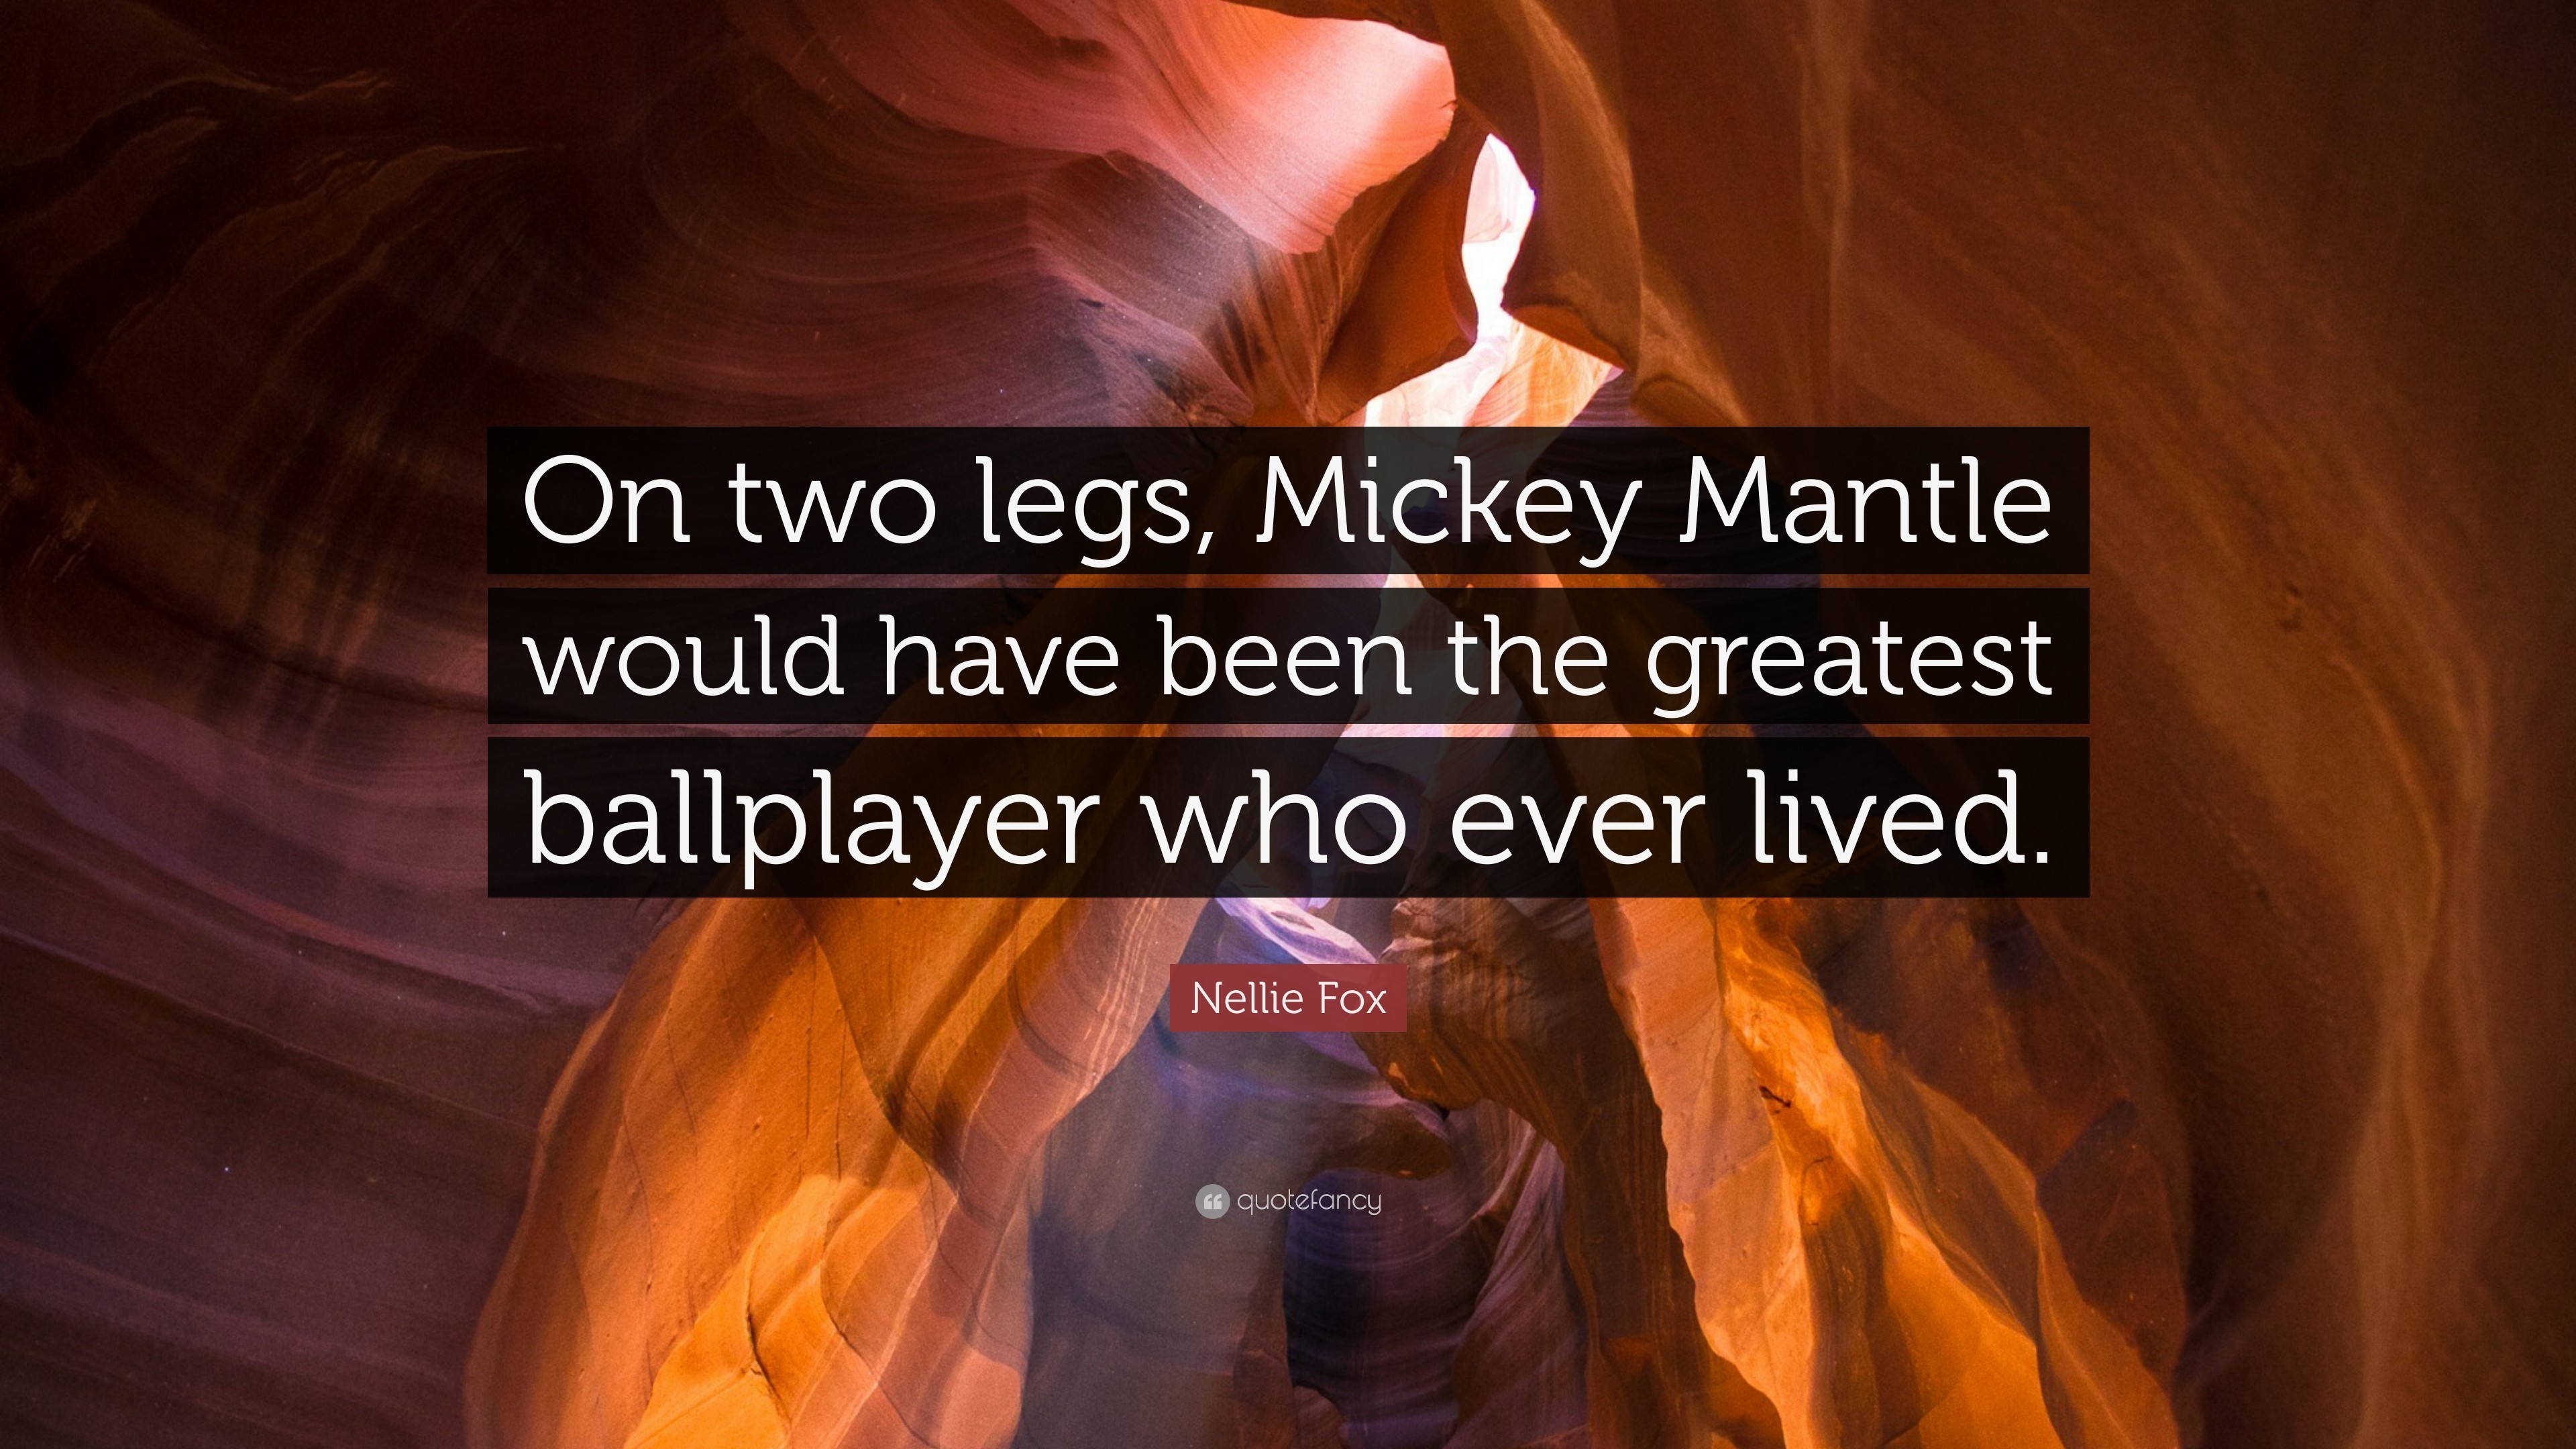 Nellie Fox Quote On two legs, Mickey Mantle would have been the greatest